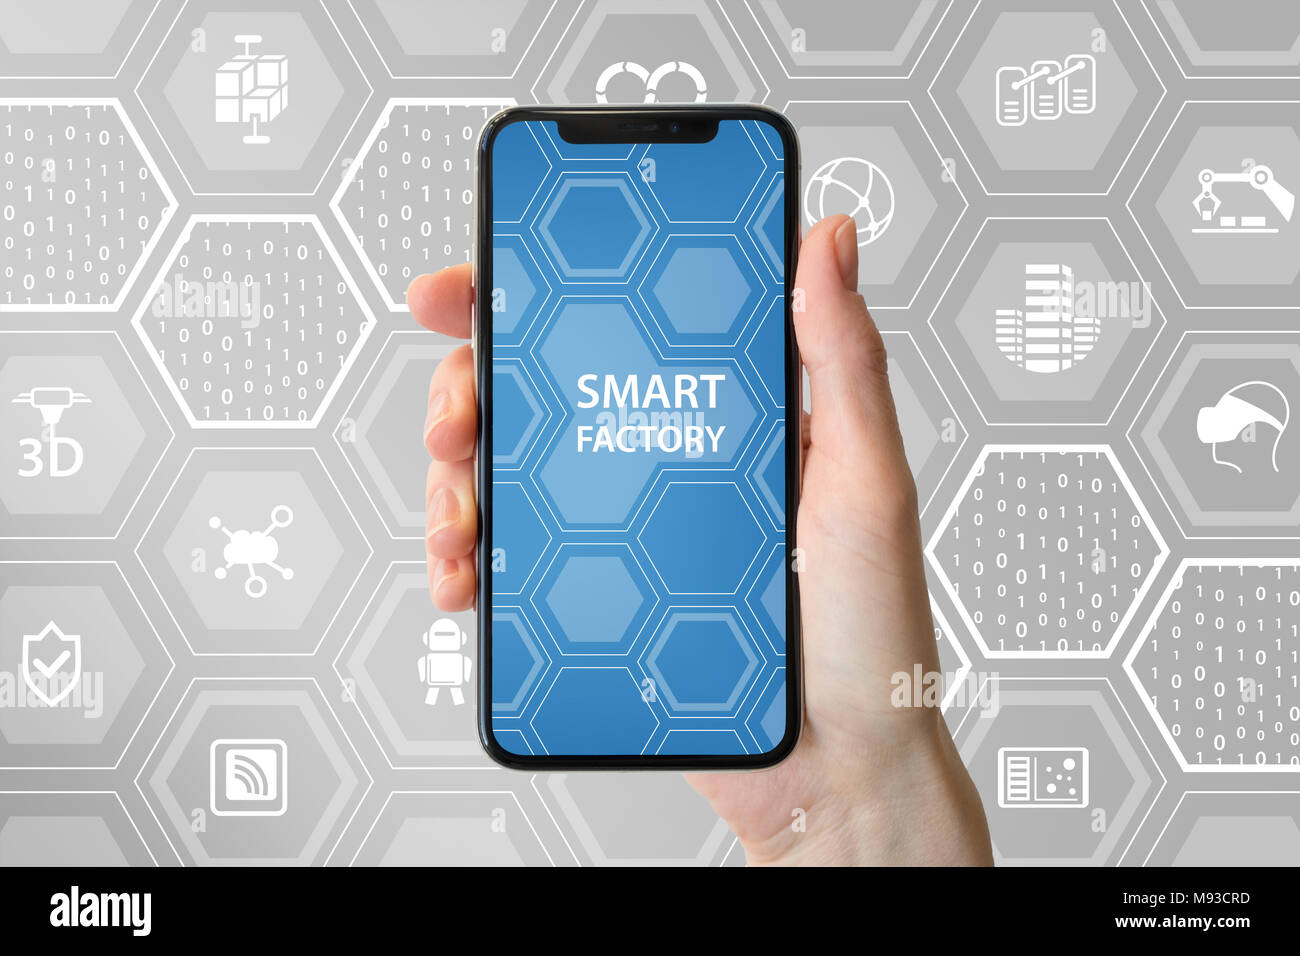 Smart factory concept with symbols. Hand holding bezel free smart phone. Stock Photo